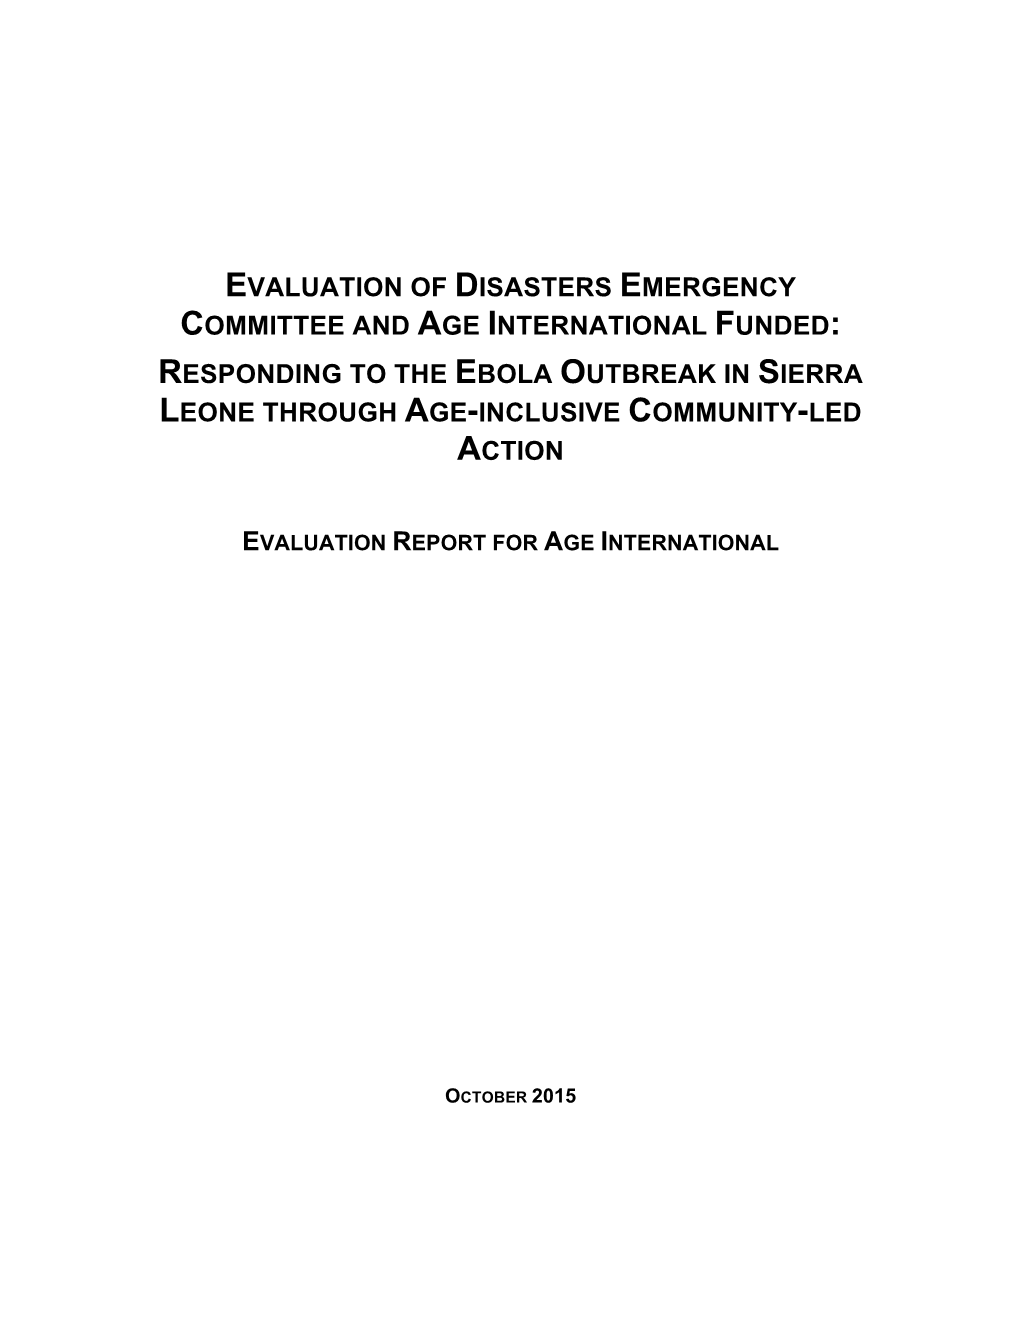 Evaluation of Disasters Emergency Committee and Age International Funded: Responding to the Ebola Outbreak in Sierra Leone Through Age-Inclusive Community-Led Action